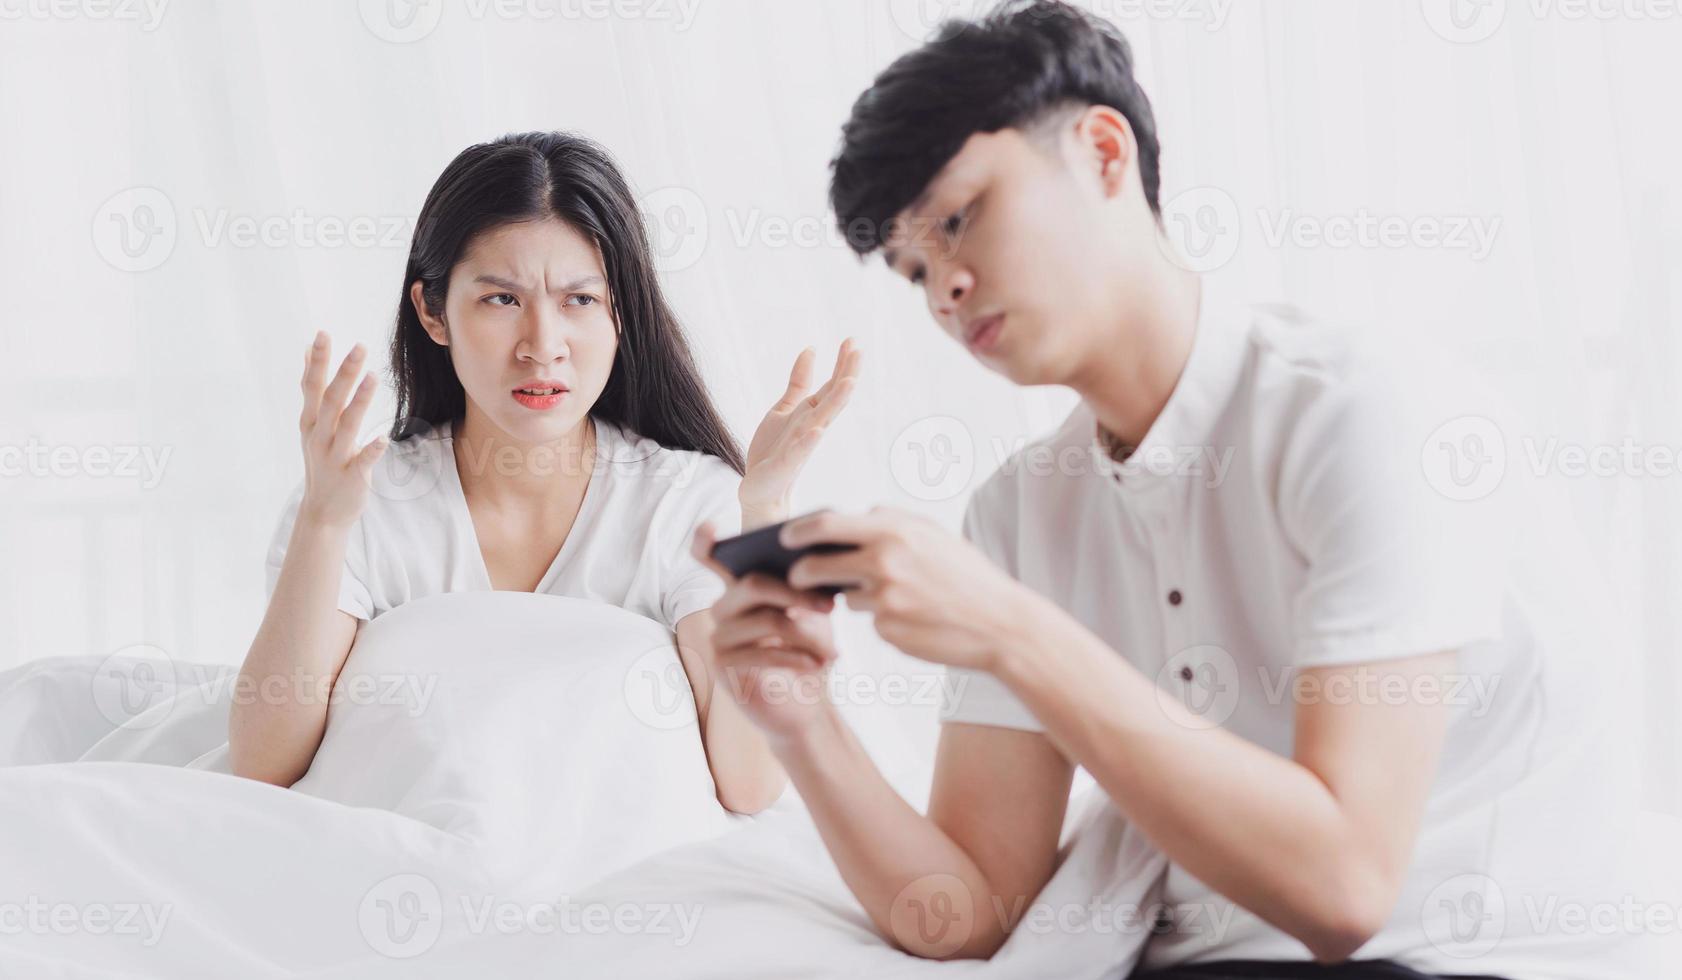 The wife is feeling upset and the husband is playing the game photo